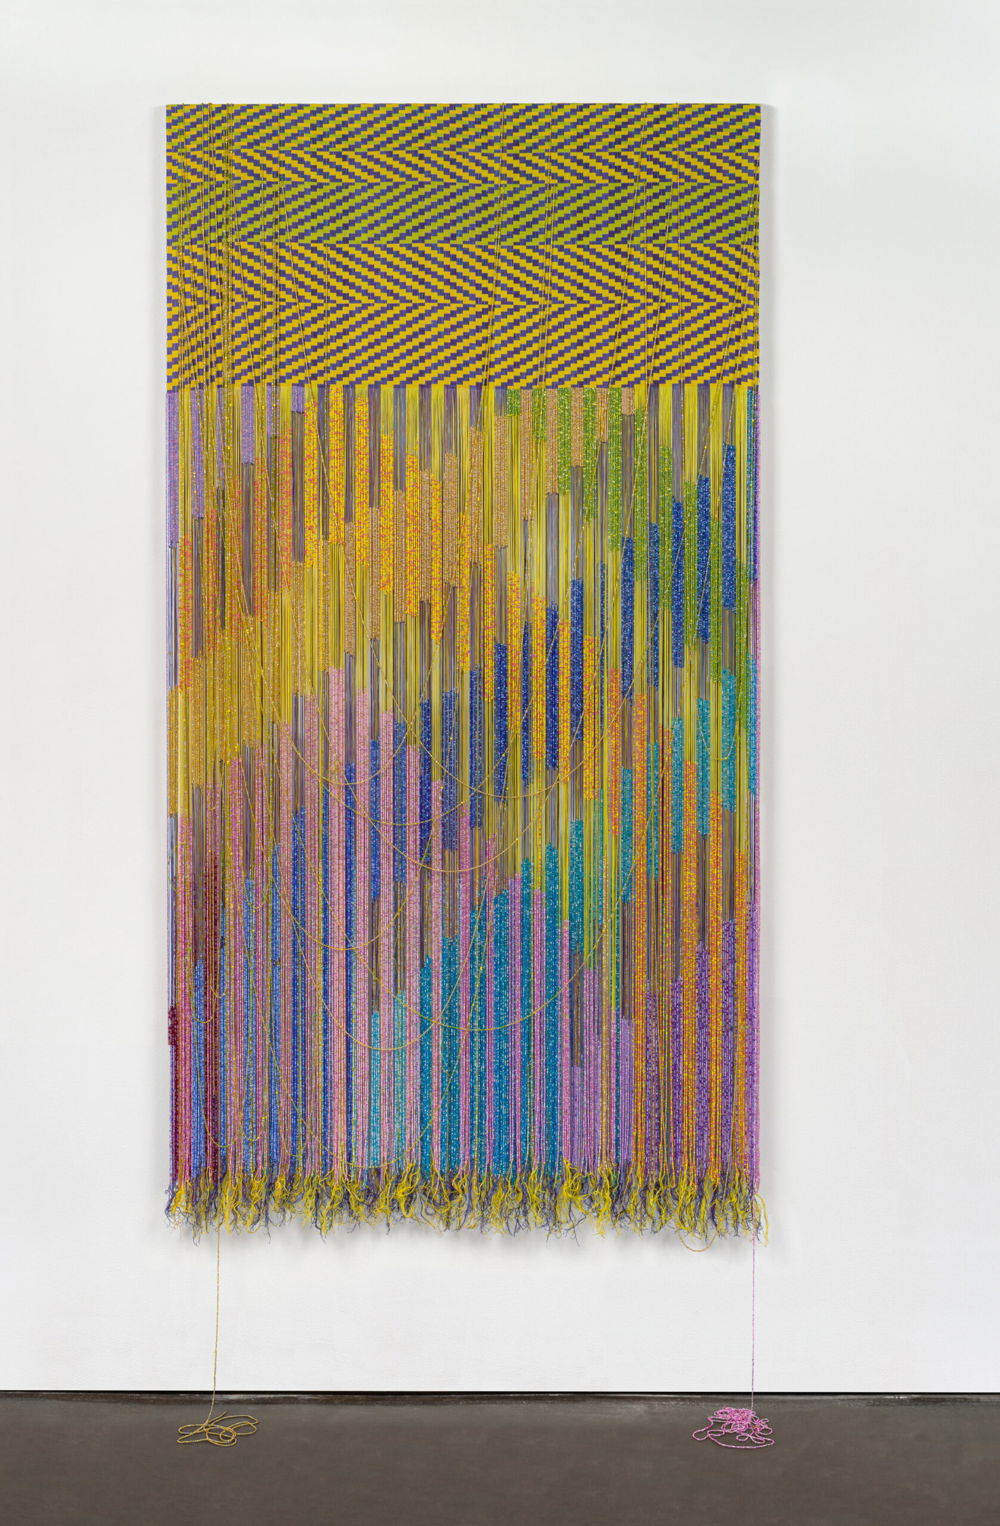 A vertical rectangular-shaped tapestry. The top quarter of the composition is a completed tapestry composed of geometric zig-zag patterning in electric yellows, greens, and violets. The bottom three quarters of the composition are unwoven with intricately-beaded strands of thread that create a vibrating pattern of criss-crossed diagonals in glowing yellows, oranges, pinks, greens, blues, turquoises, and purples. A few loose strands are wisped upward creating thin U-shaped lines. Additional loose strands dangle downward to puddle onto the floor.